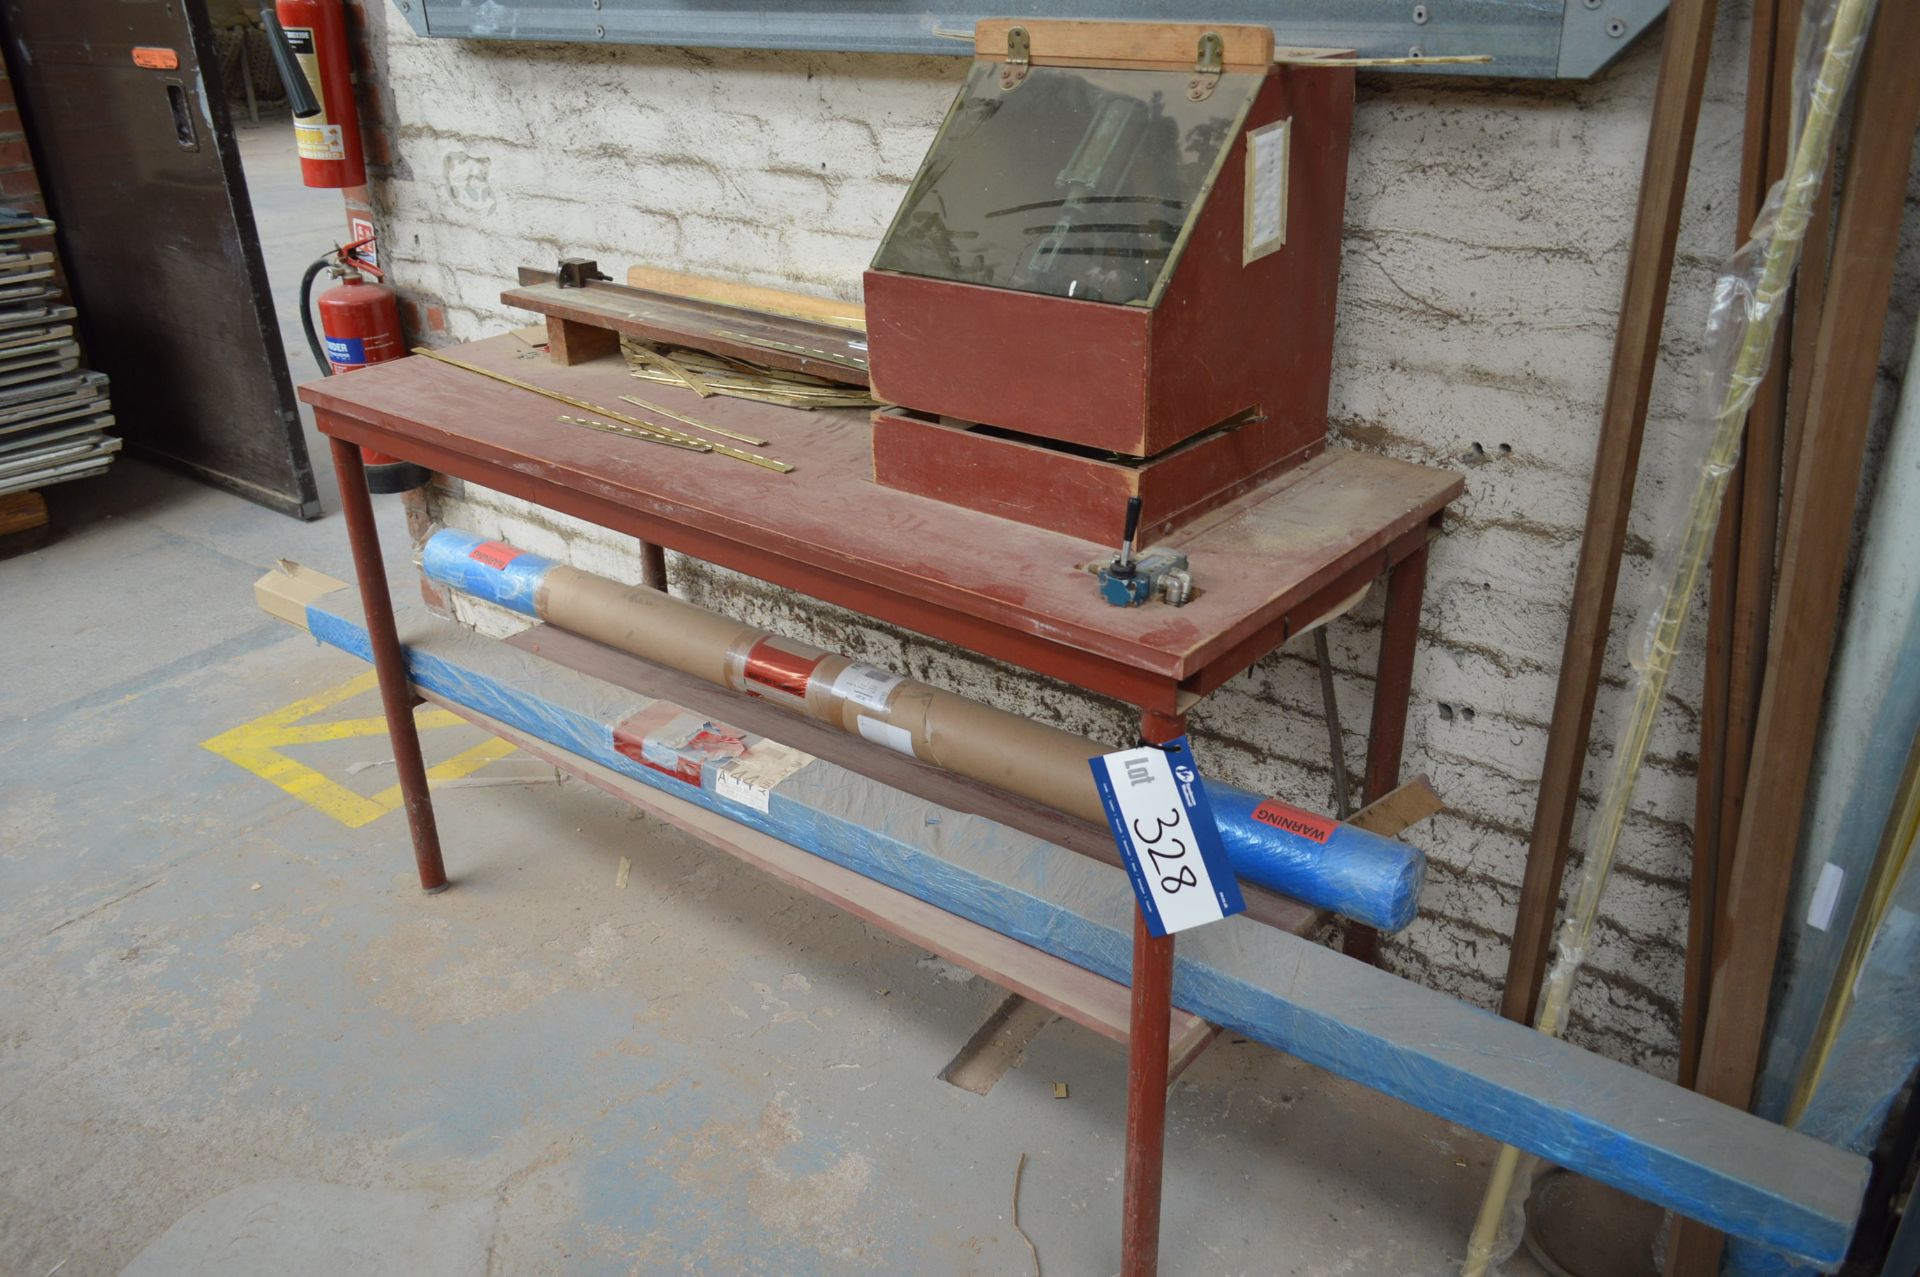 120mm Jaw Pneumatic Hinge Shear, with bench, (contents not included) (reserve removal until contents